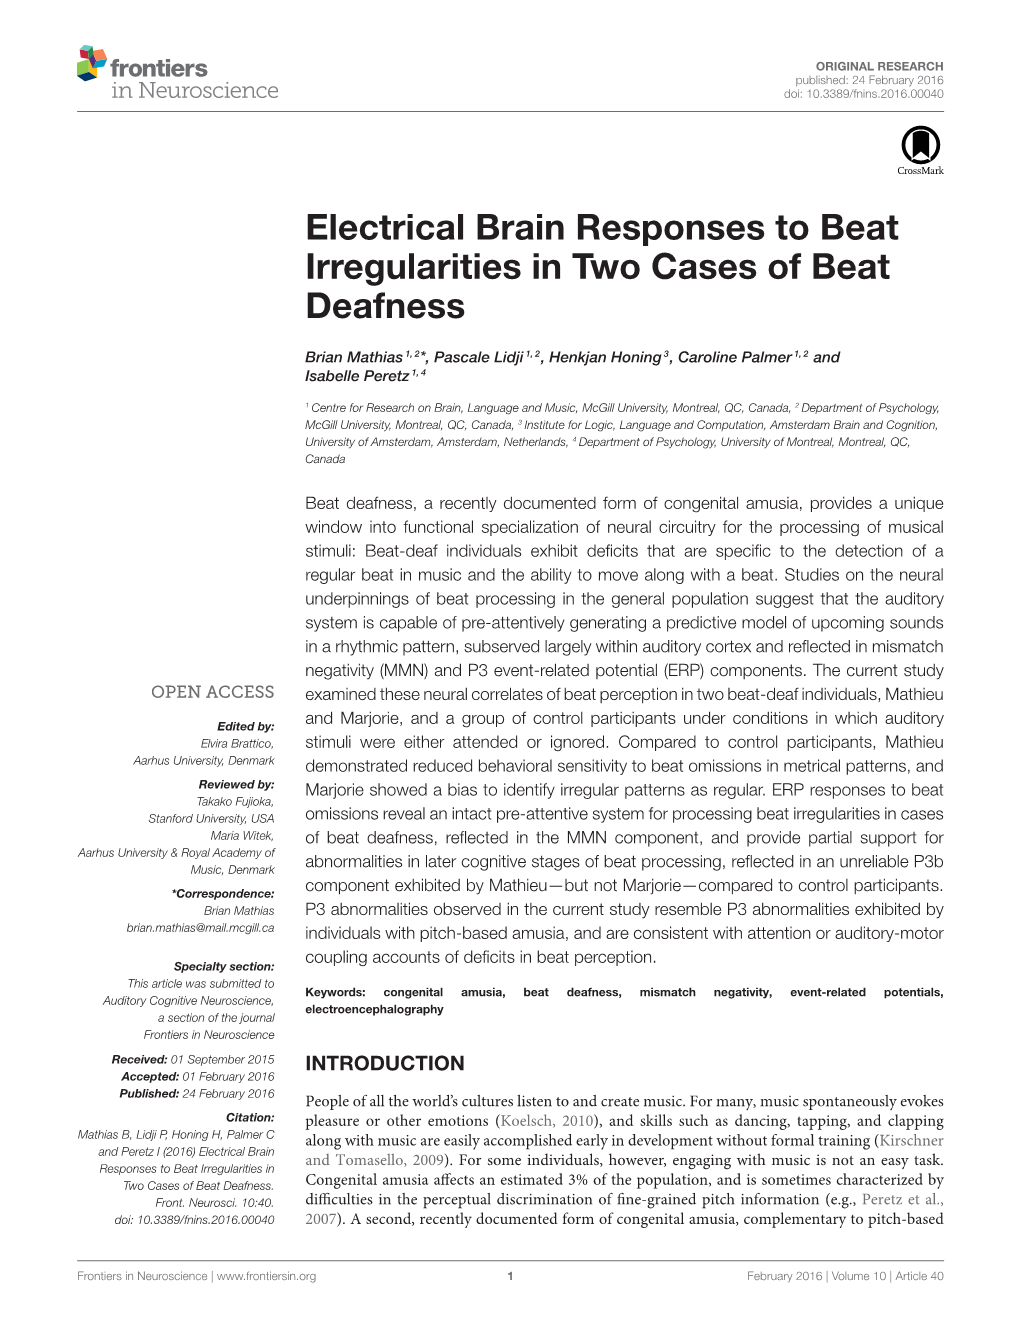 Electrical Brain Responses to Beat Irregularities in Two Cases of Beat Deafness